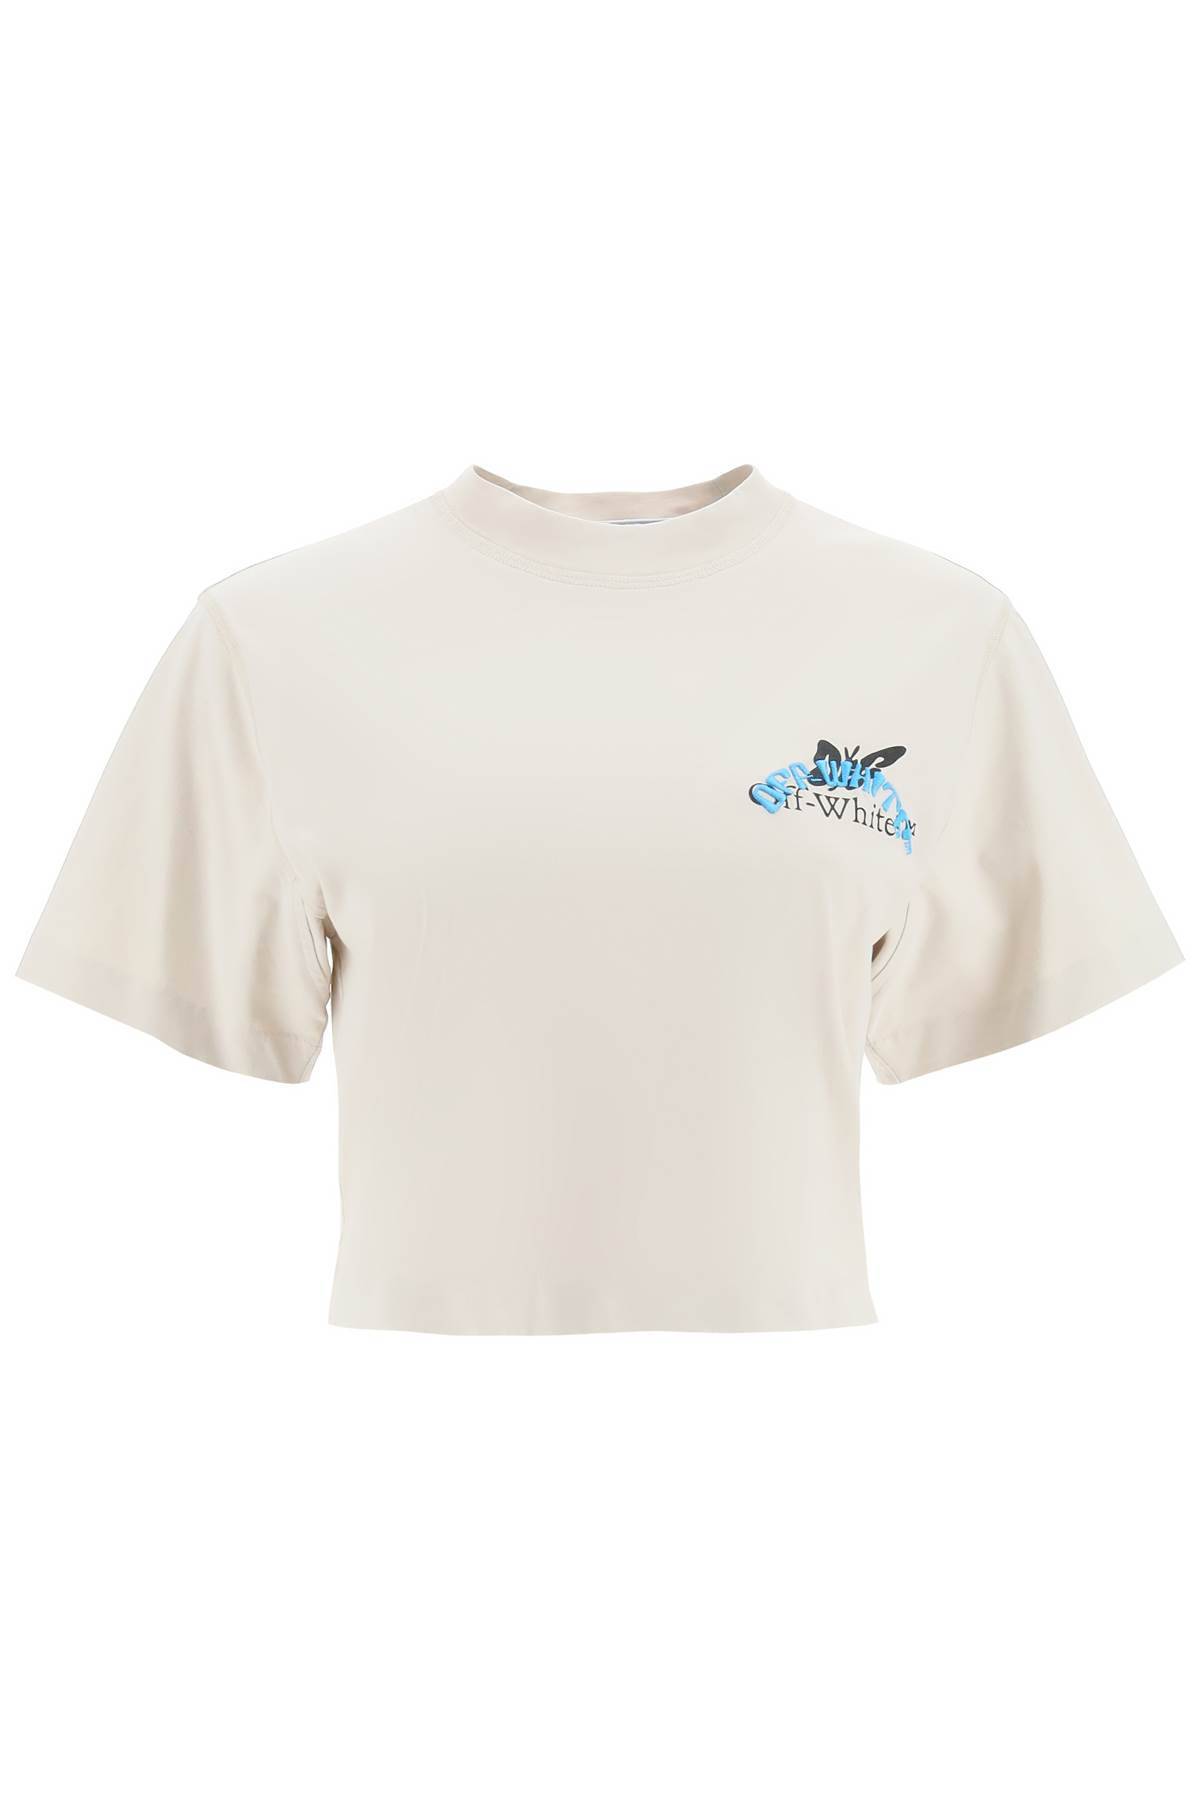 OFF-WHITE OFF-WHITE cropped butterfly t-shirt